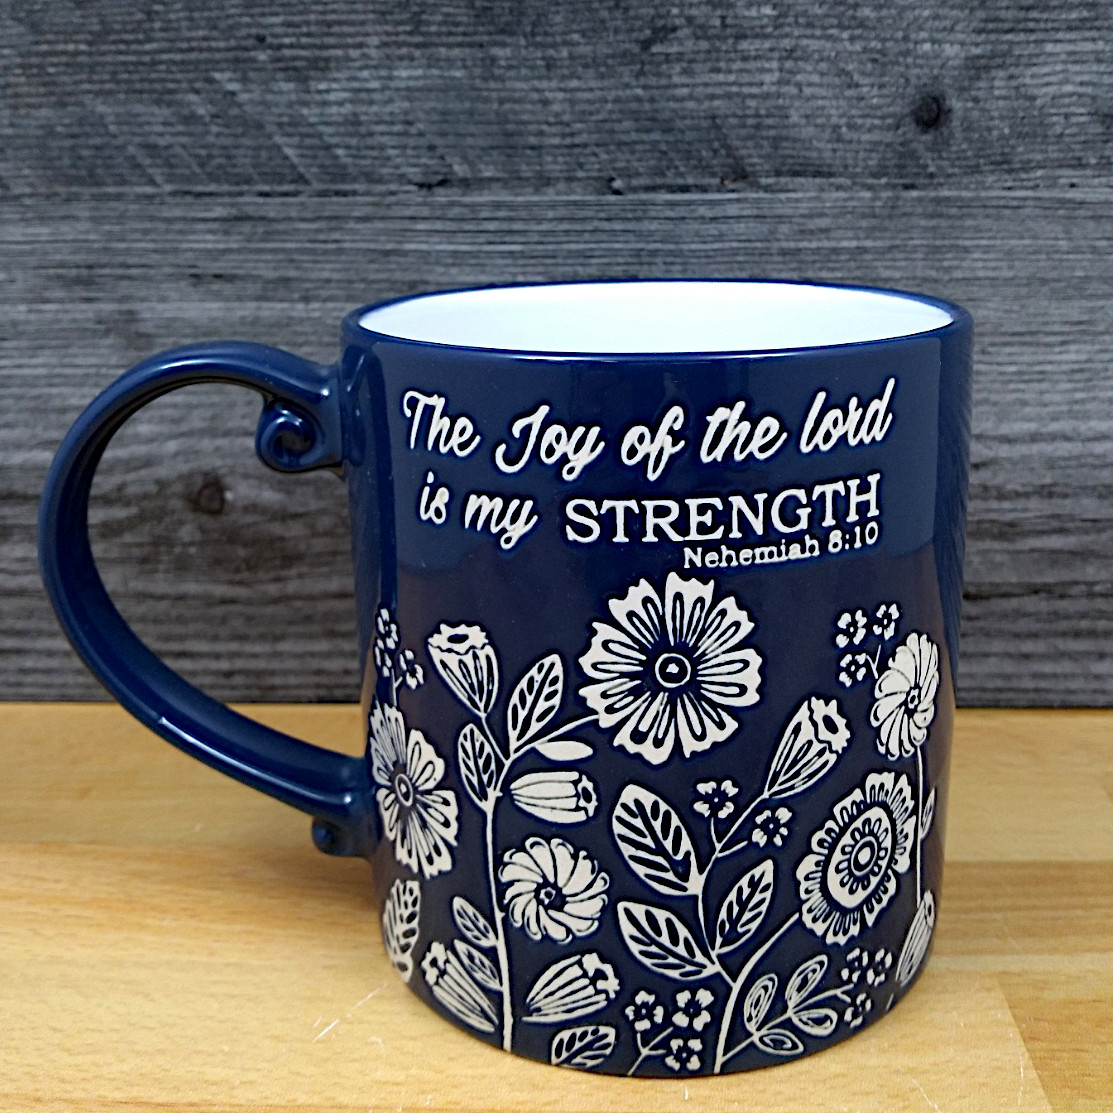 This Religious Inspirational Coffee Mug Faith Embossed Beverage Cup 21oz 621ml is made with love by Premier Homegoods! Shop more unique gift ideas today with Spots Initiatives, the best way to support creators.